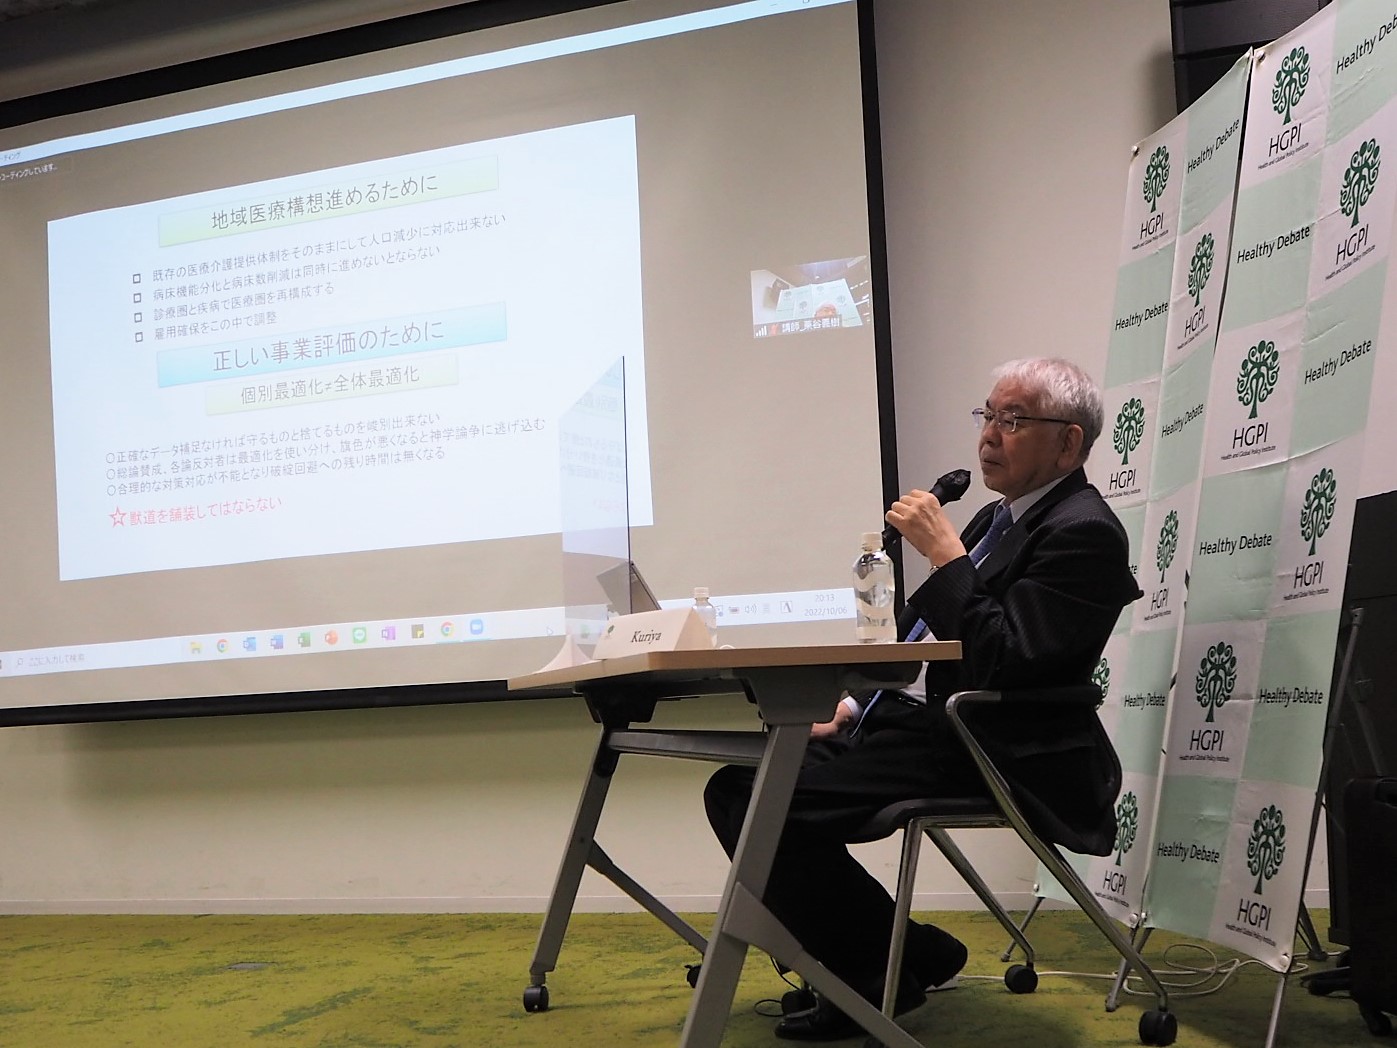 [Event Report] The 11th Semester of Health Policy Academy, Lecture 5 – Community Healthcare in Japan (October 6, 2022)